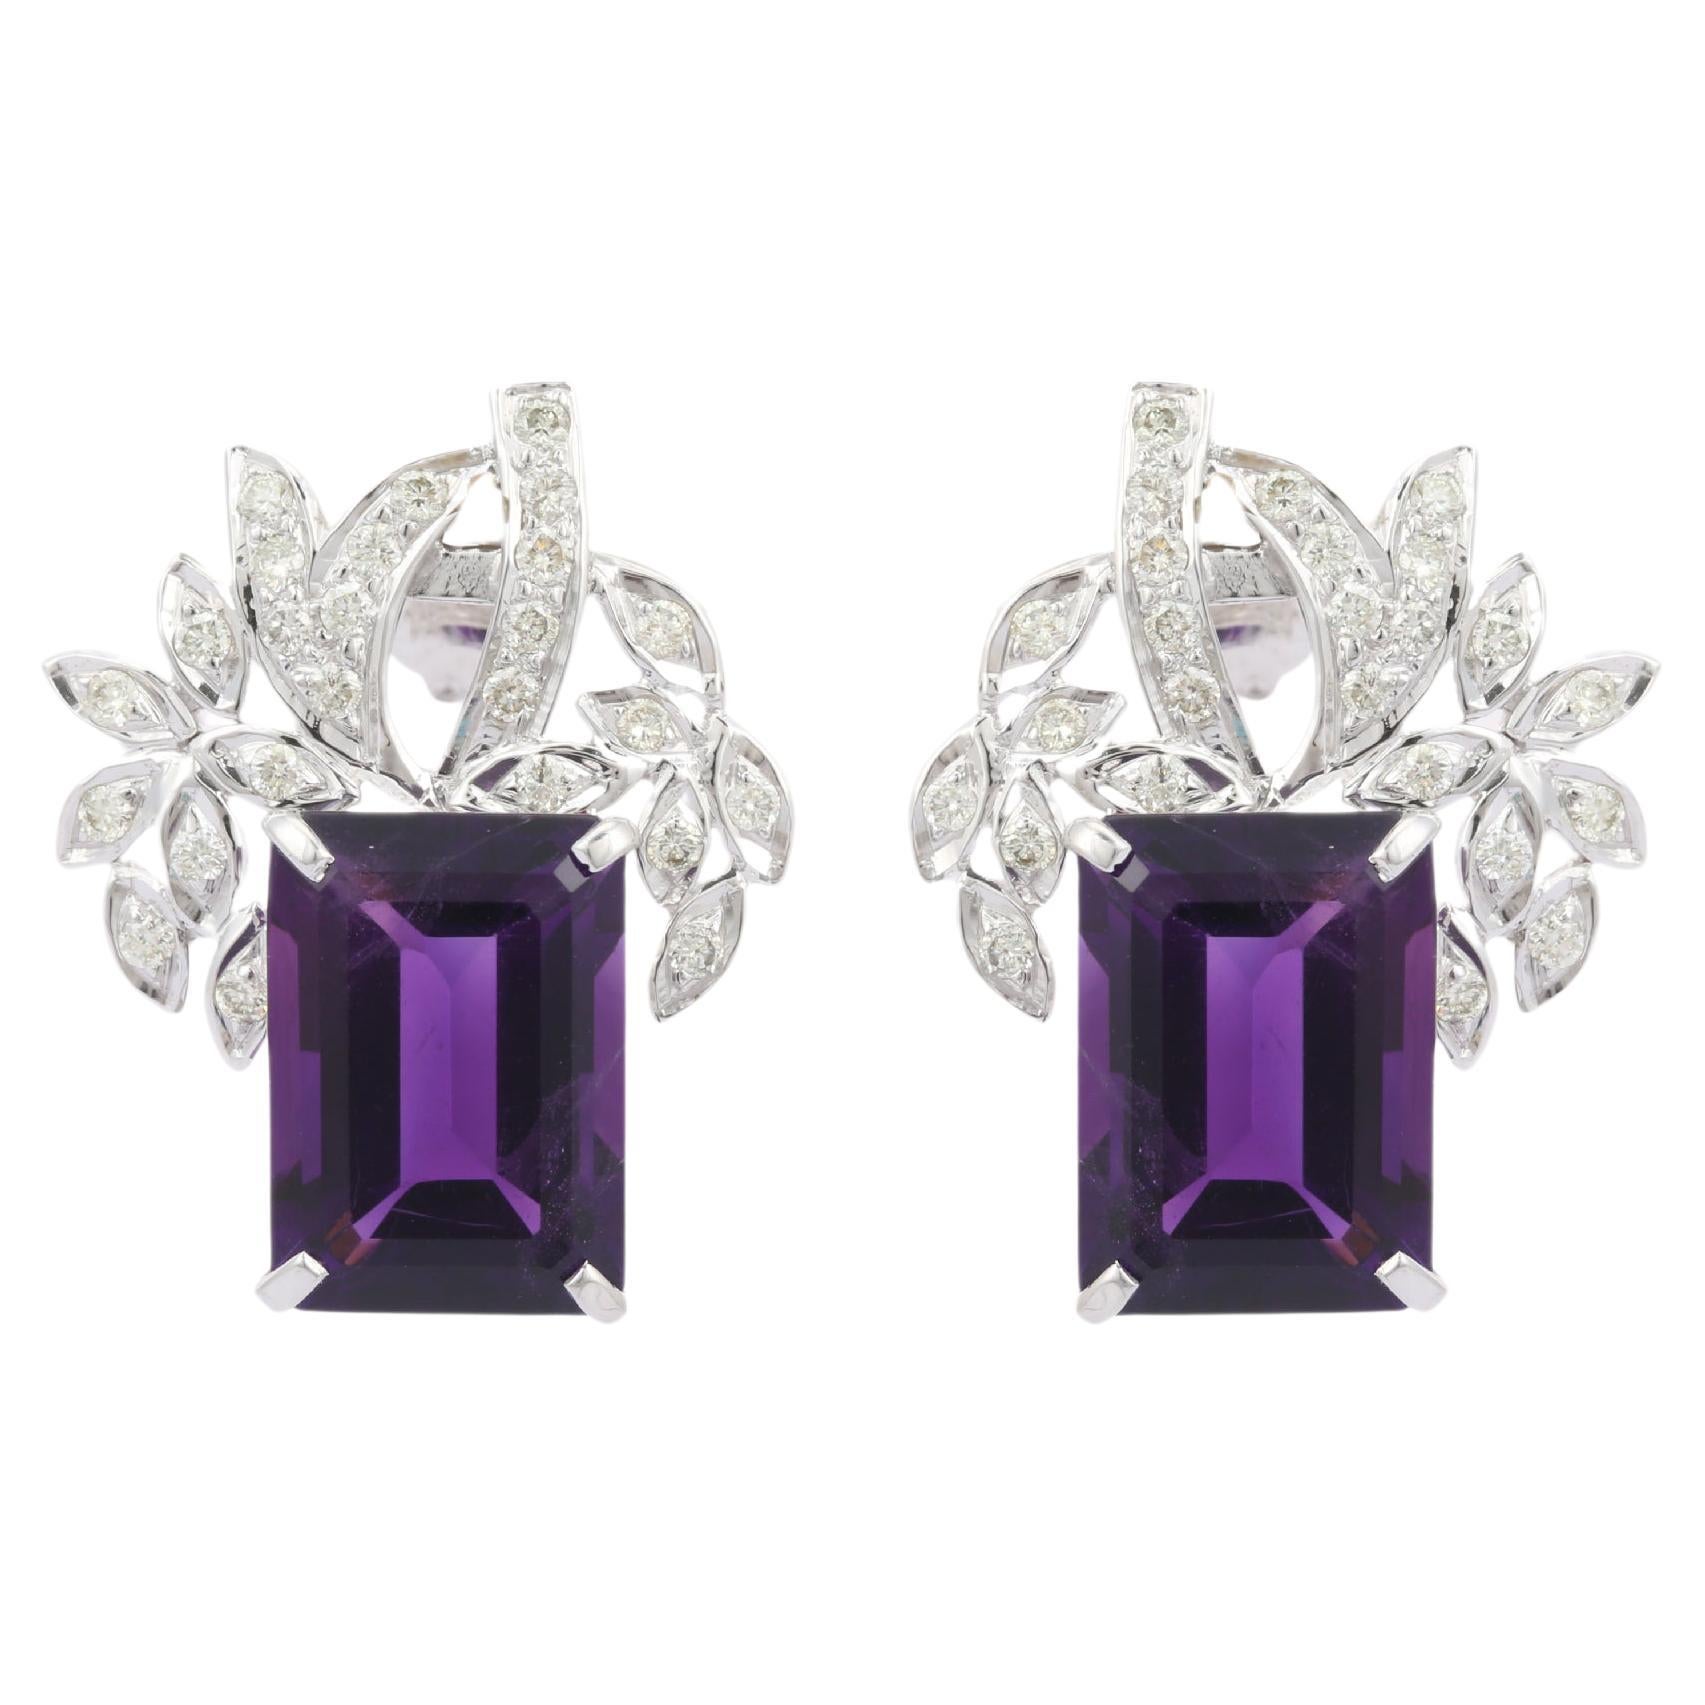 Statement 18kt Solid White Gold 14.7 ct Octagon Amethyst Diamond Stud Earrings